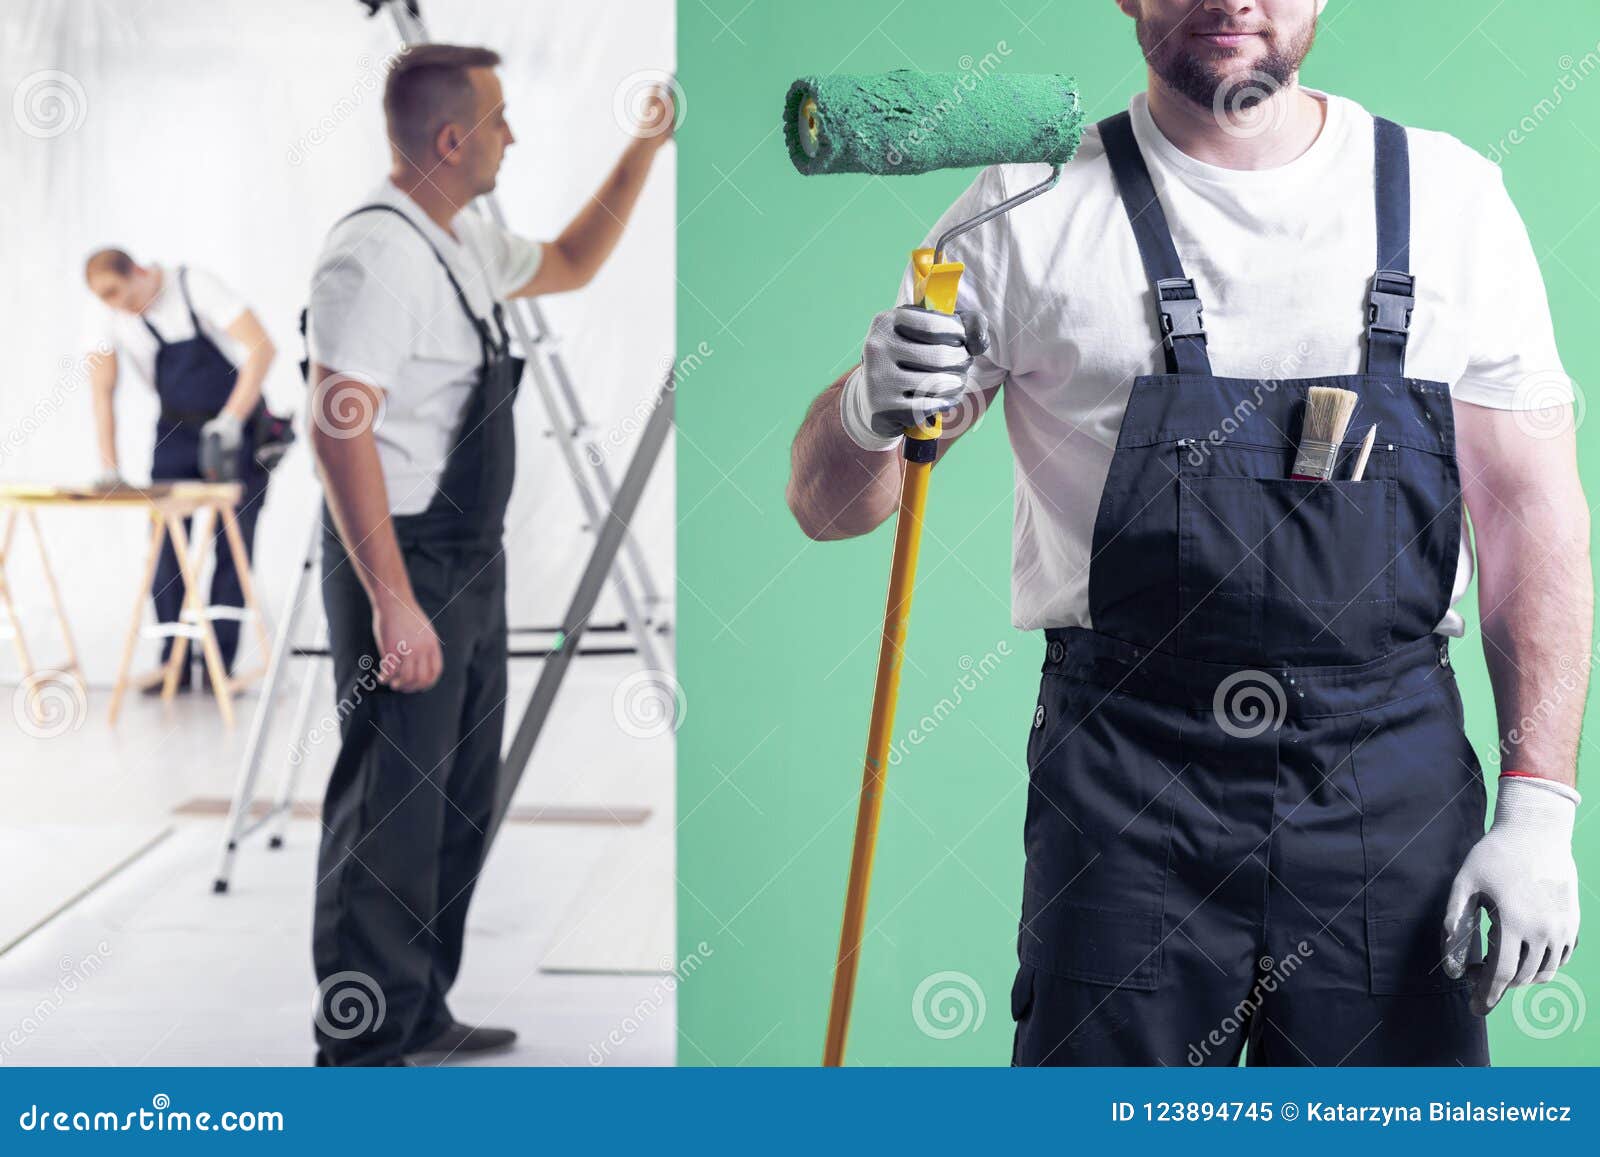 wall painter in dungarees holding a paint roller on a neo mint g